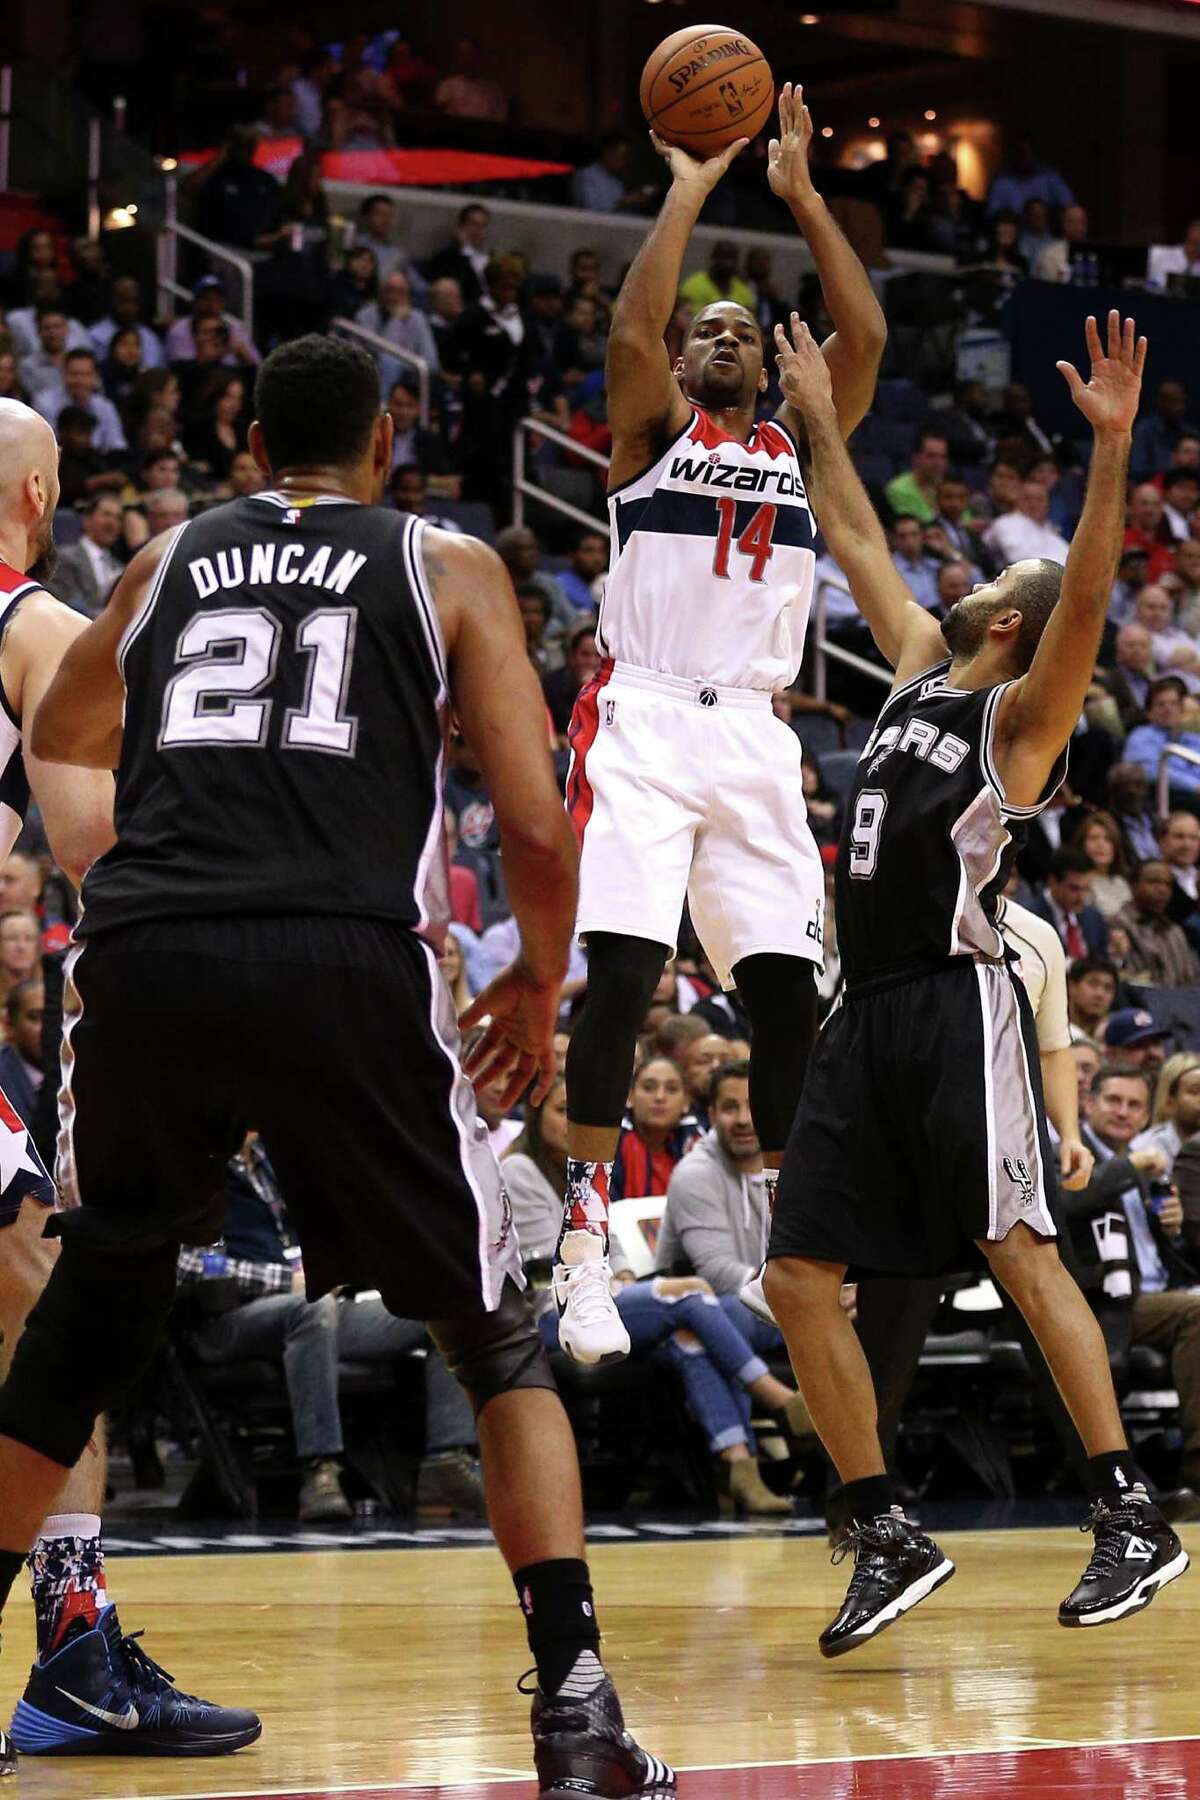 WASHINGTON, DC - NOVEMBER 04: Gary Neal #14 of the Washington Wizards shoots in front of Tony Parker #9 of the San Antonio Spurs during the first half at Verizon Center on November 4, 2015 in Washington, DC. NOTE TO USER: User expressly acknowledges and agrees that, by downloading and or using this photograph, User is consenting to the terms and conditions of the Getty Images License Agreement.